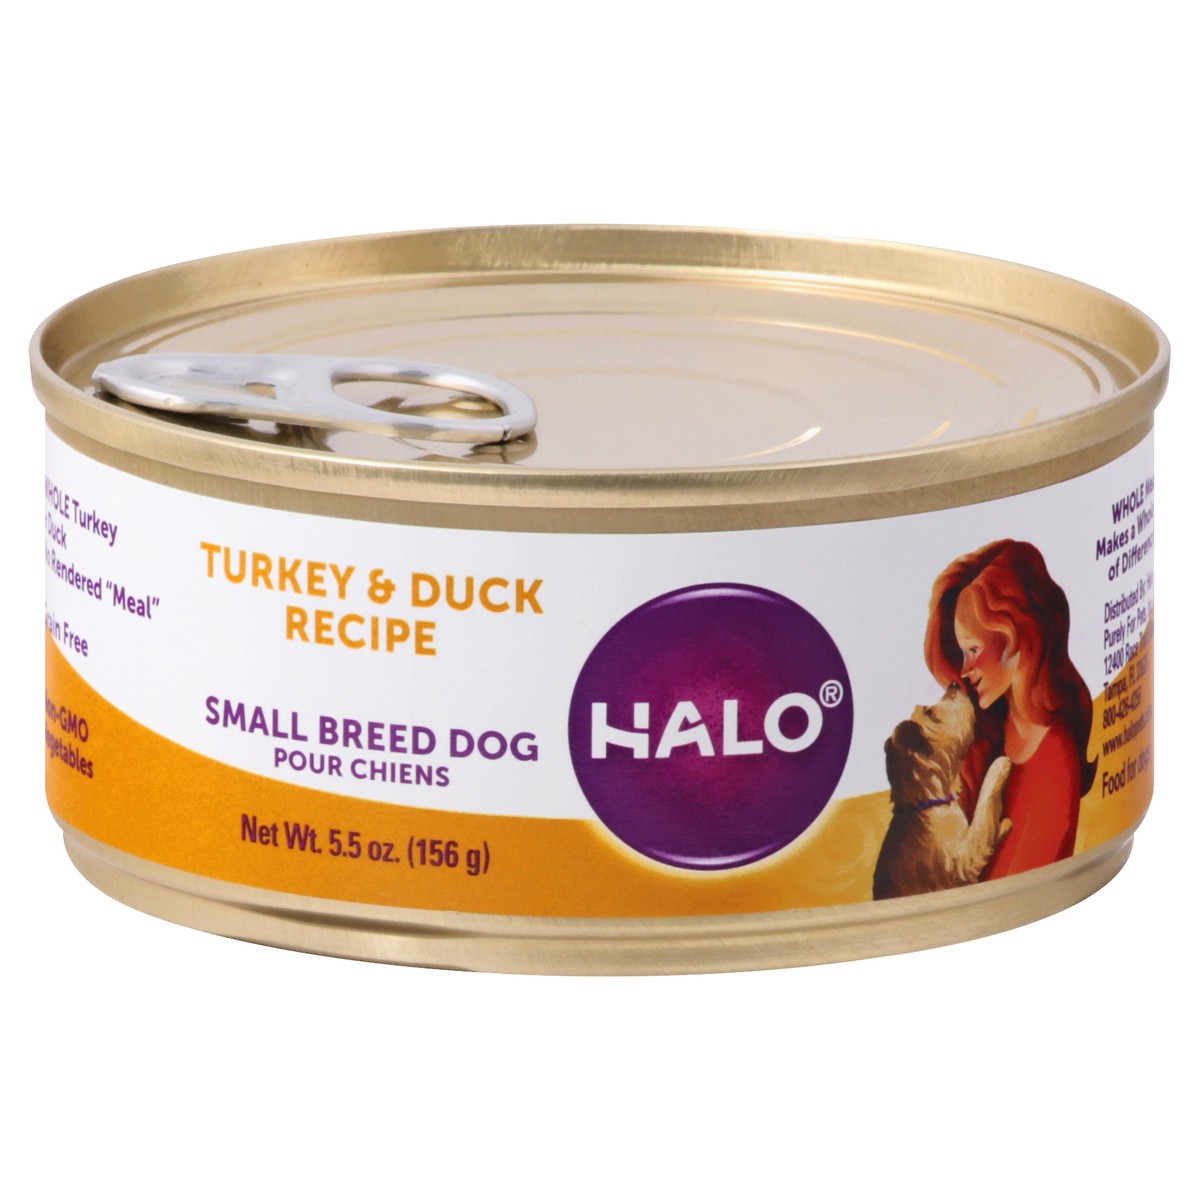 slide 2 of 9, Halo Small Breed Dog Turkey & Duck Recipe Food for Dogs 5.5 oz, 5.5 oz